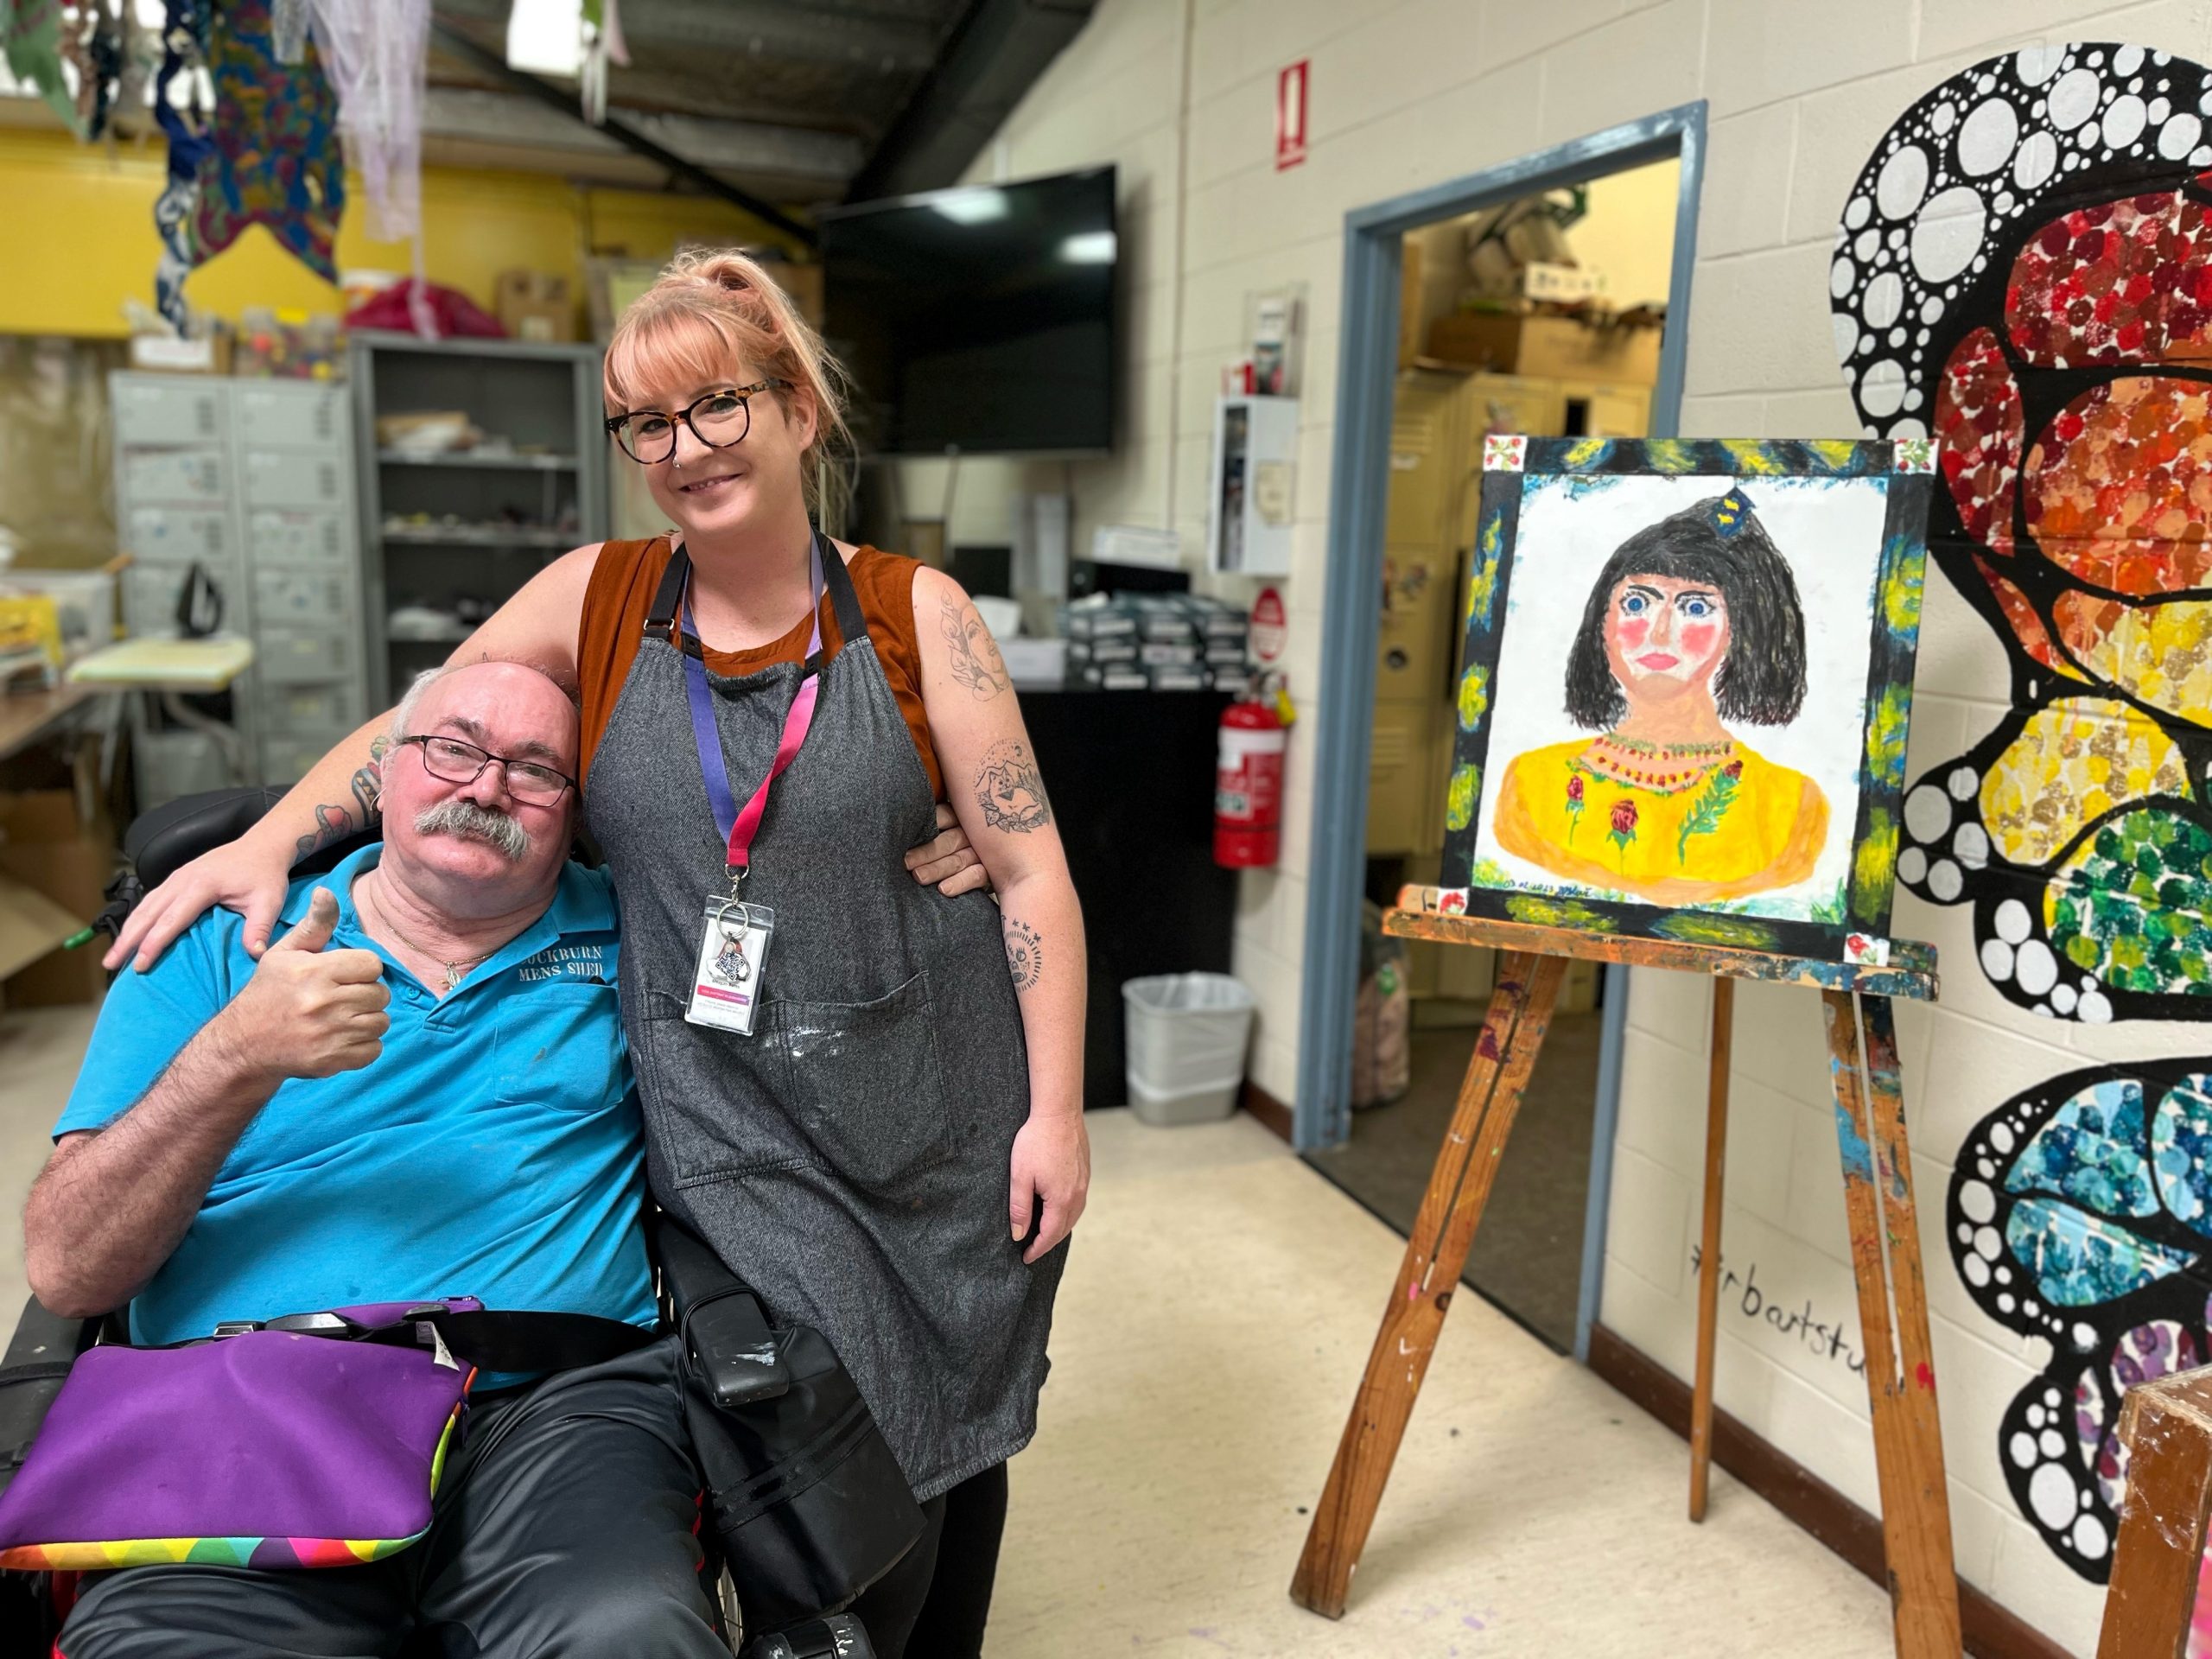 Artist Blaz with Rocky Bay Support Worker Meagan in the Studio. Blaz's colourful artwork is featured on an easel next to Meagan